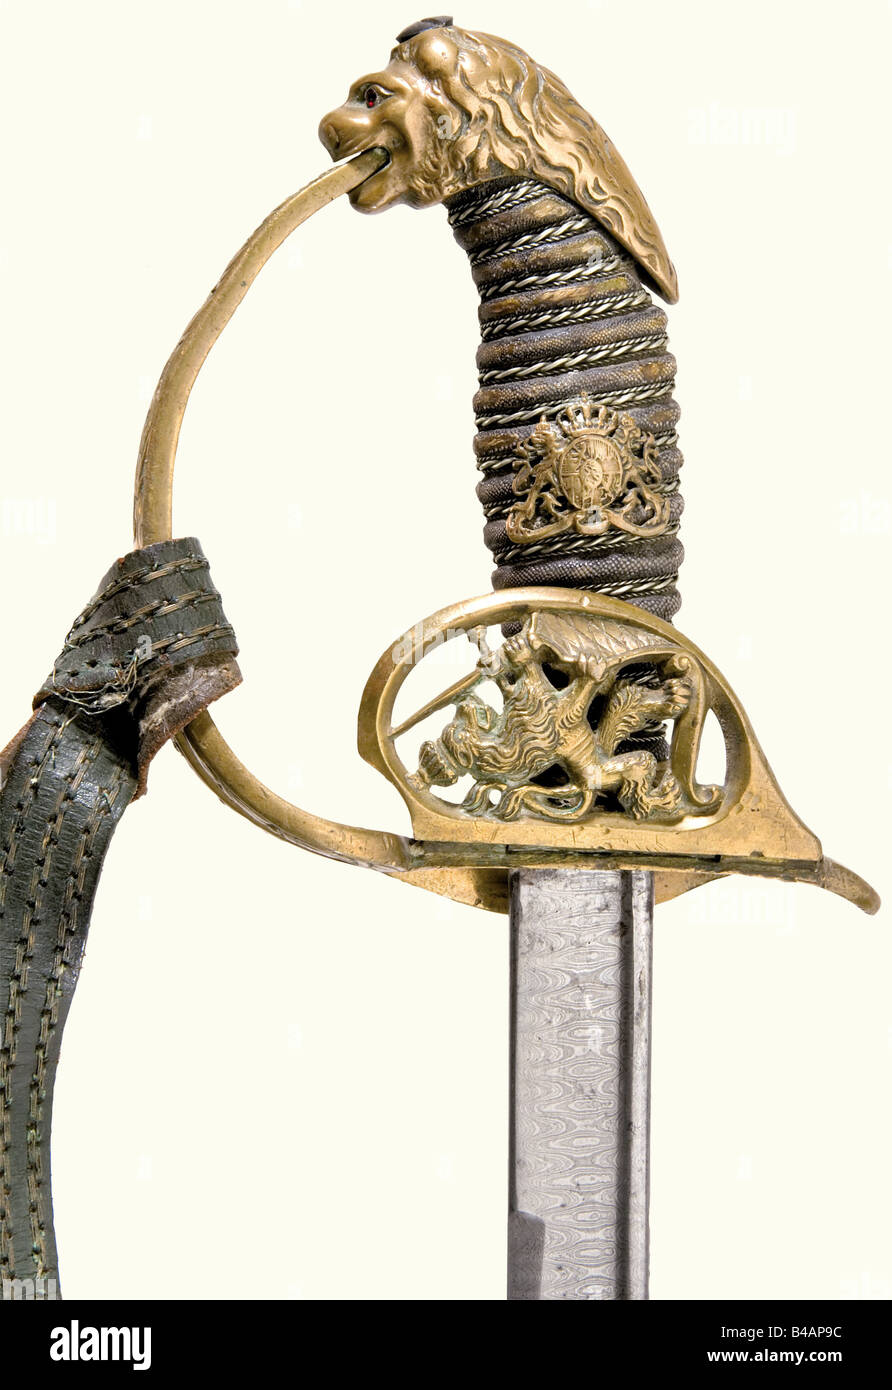 An infantry officer's sword, Bavarian model A straight, single-edged reinforced blade of watered steel with yelmen. Etched with 'In Treue fest' (Firm in loyalty), on both sides of the blade, with ' Gwinner s./l. Tandern 1895' below it on the obverse side. Gold-plated brass hilt with a folding guard plate. Lion's head pommel and sharkskin grip cover with silver wire wrapping, superimposed with the Bavarian coat of arms. There is a green leather sword knot attached, which does not belong to the sword. Black lacquered, metal scabbard with a fixed suspension ring a, Stock Photo